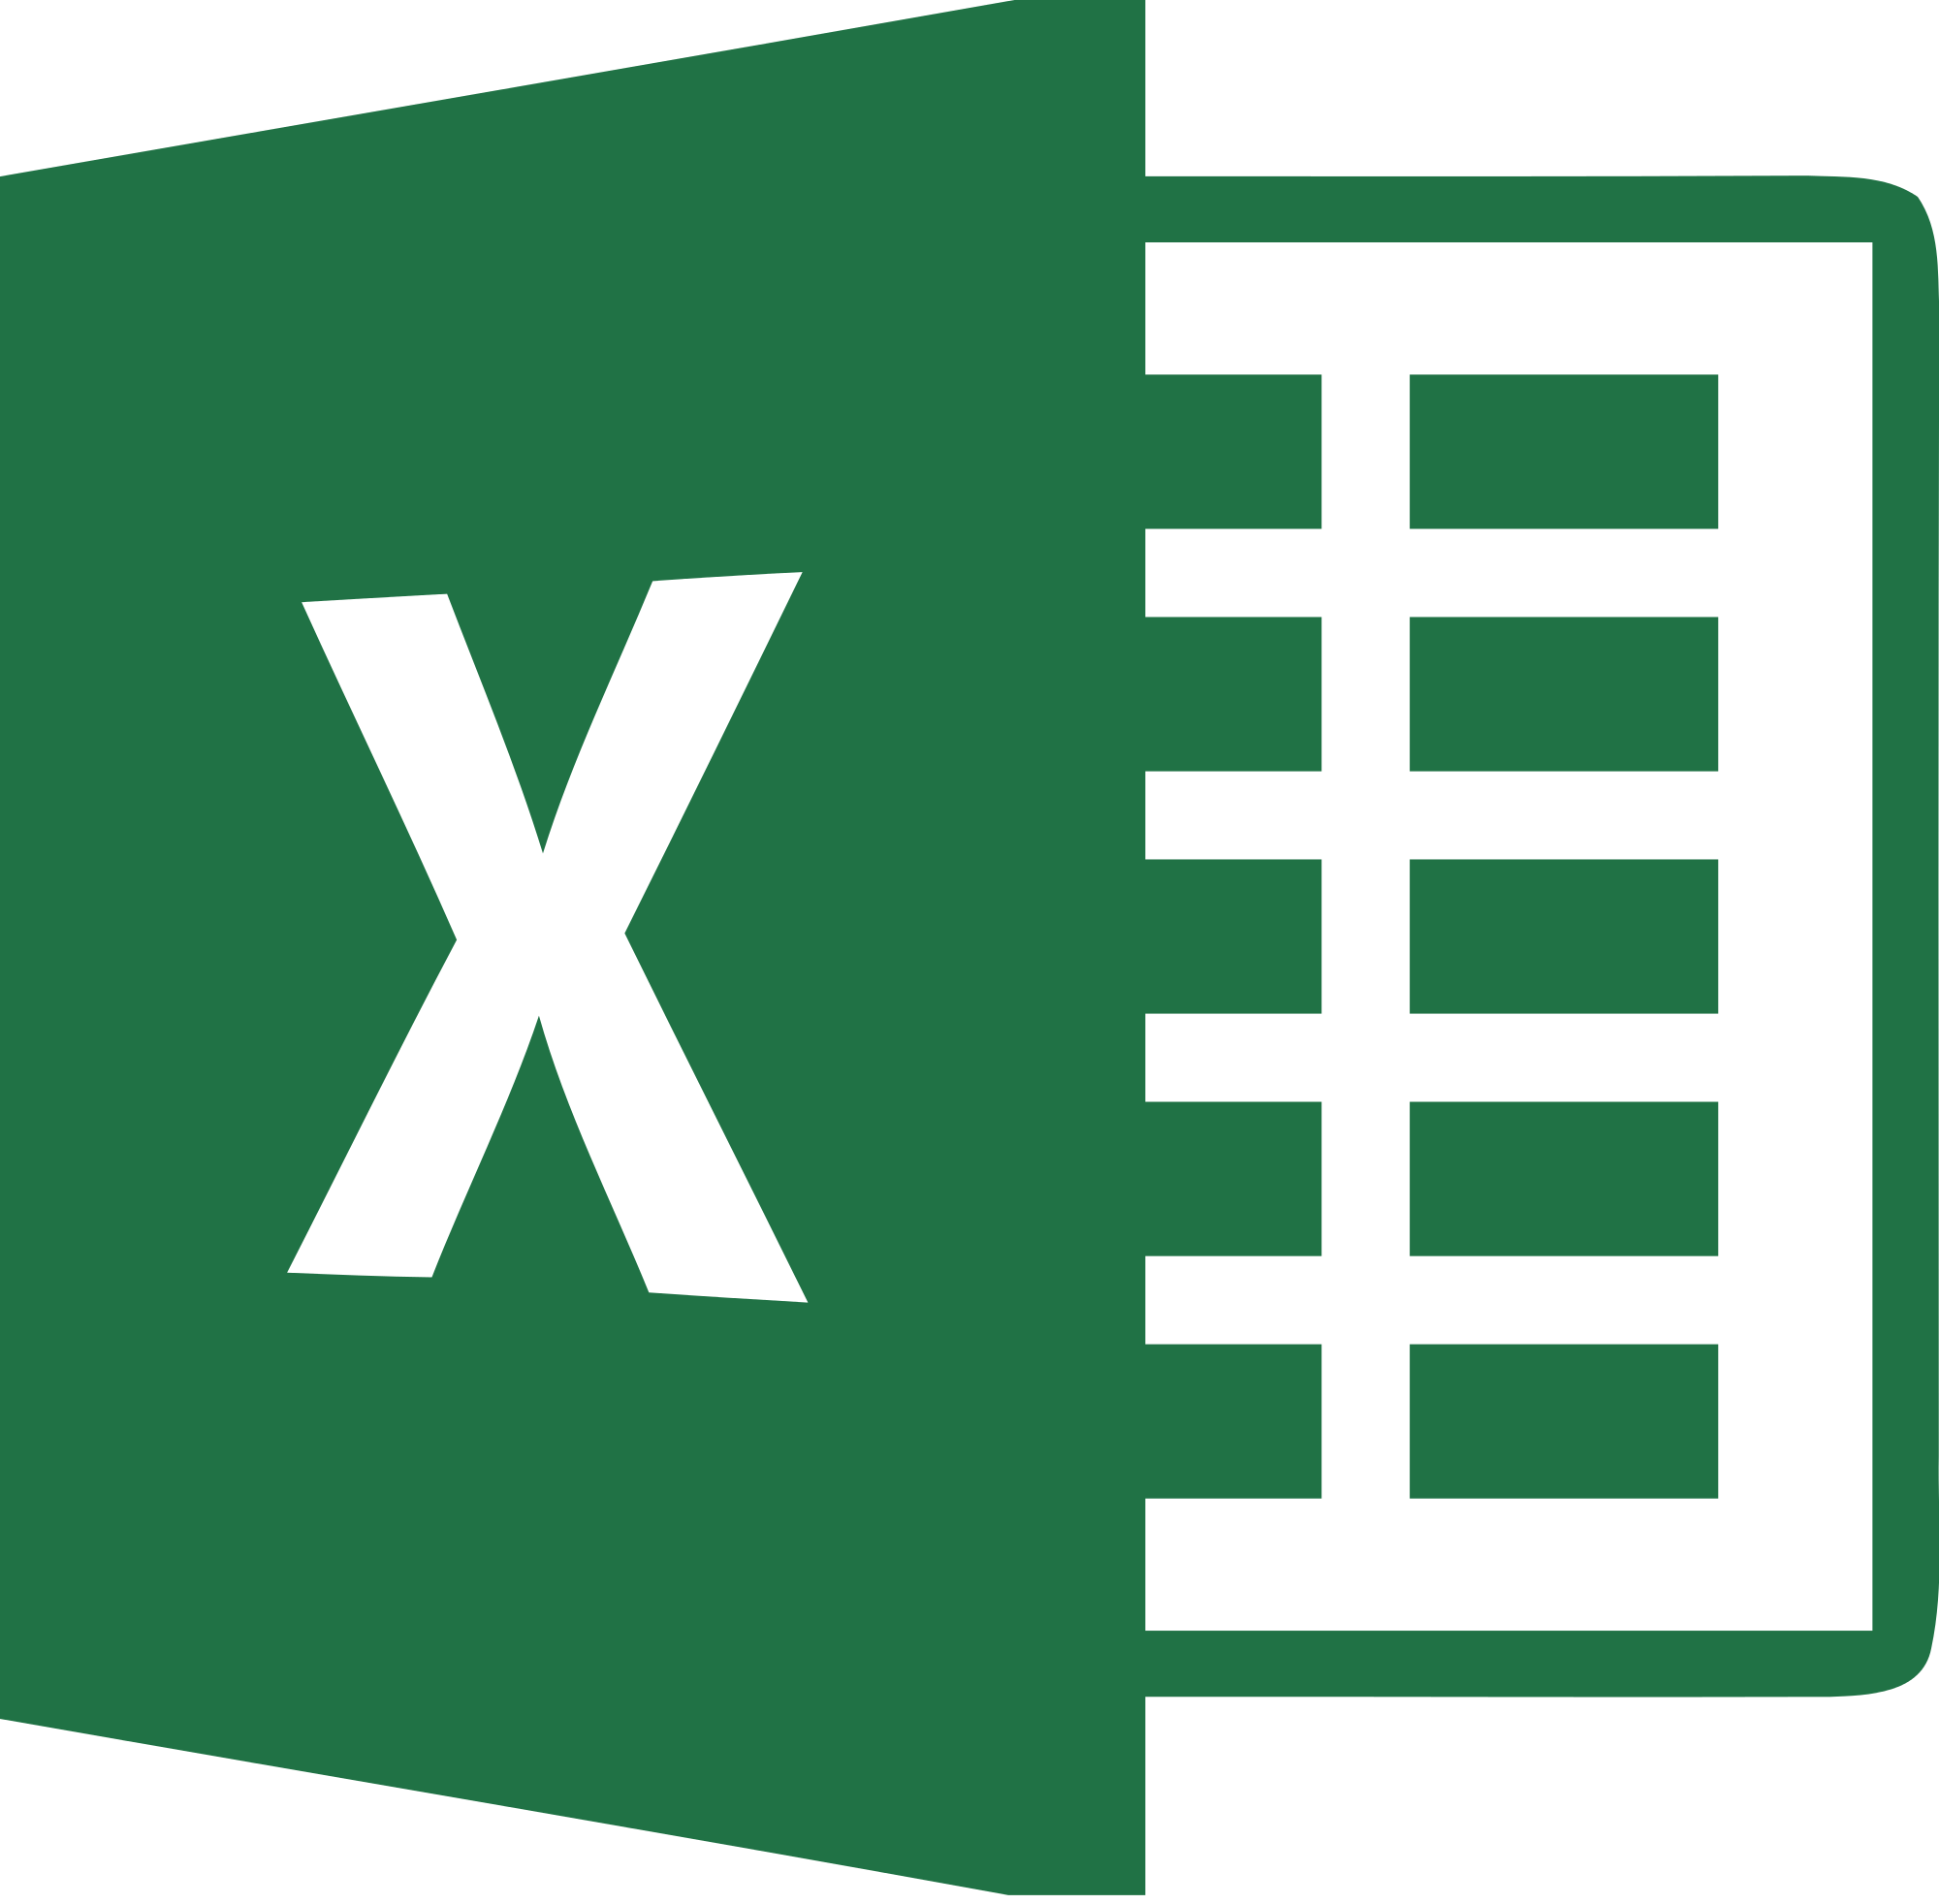 Vba classes nyc excel. Class clipart training manual